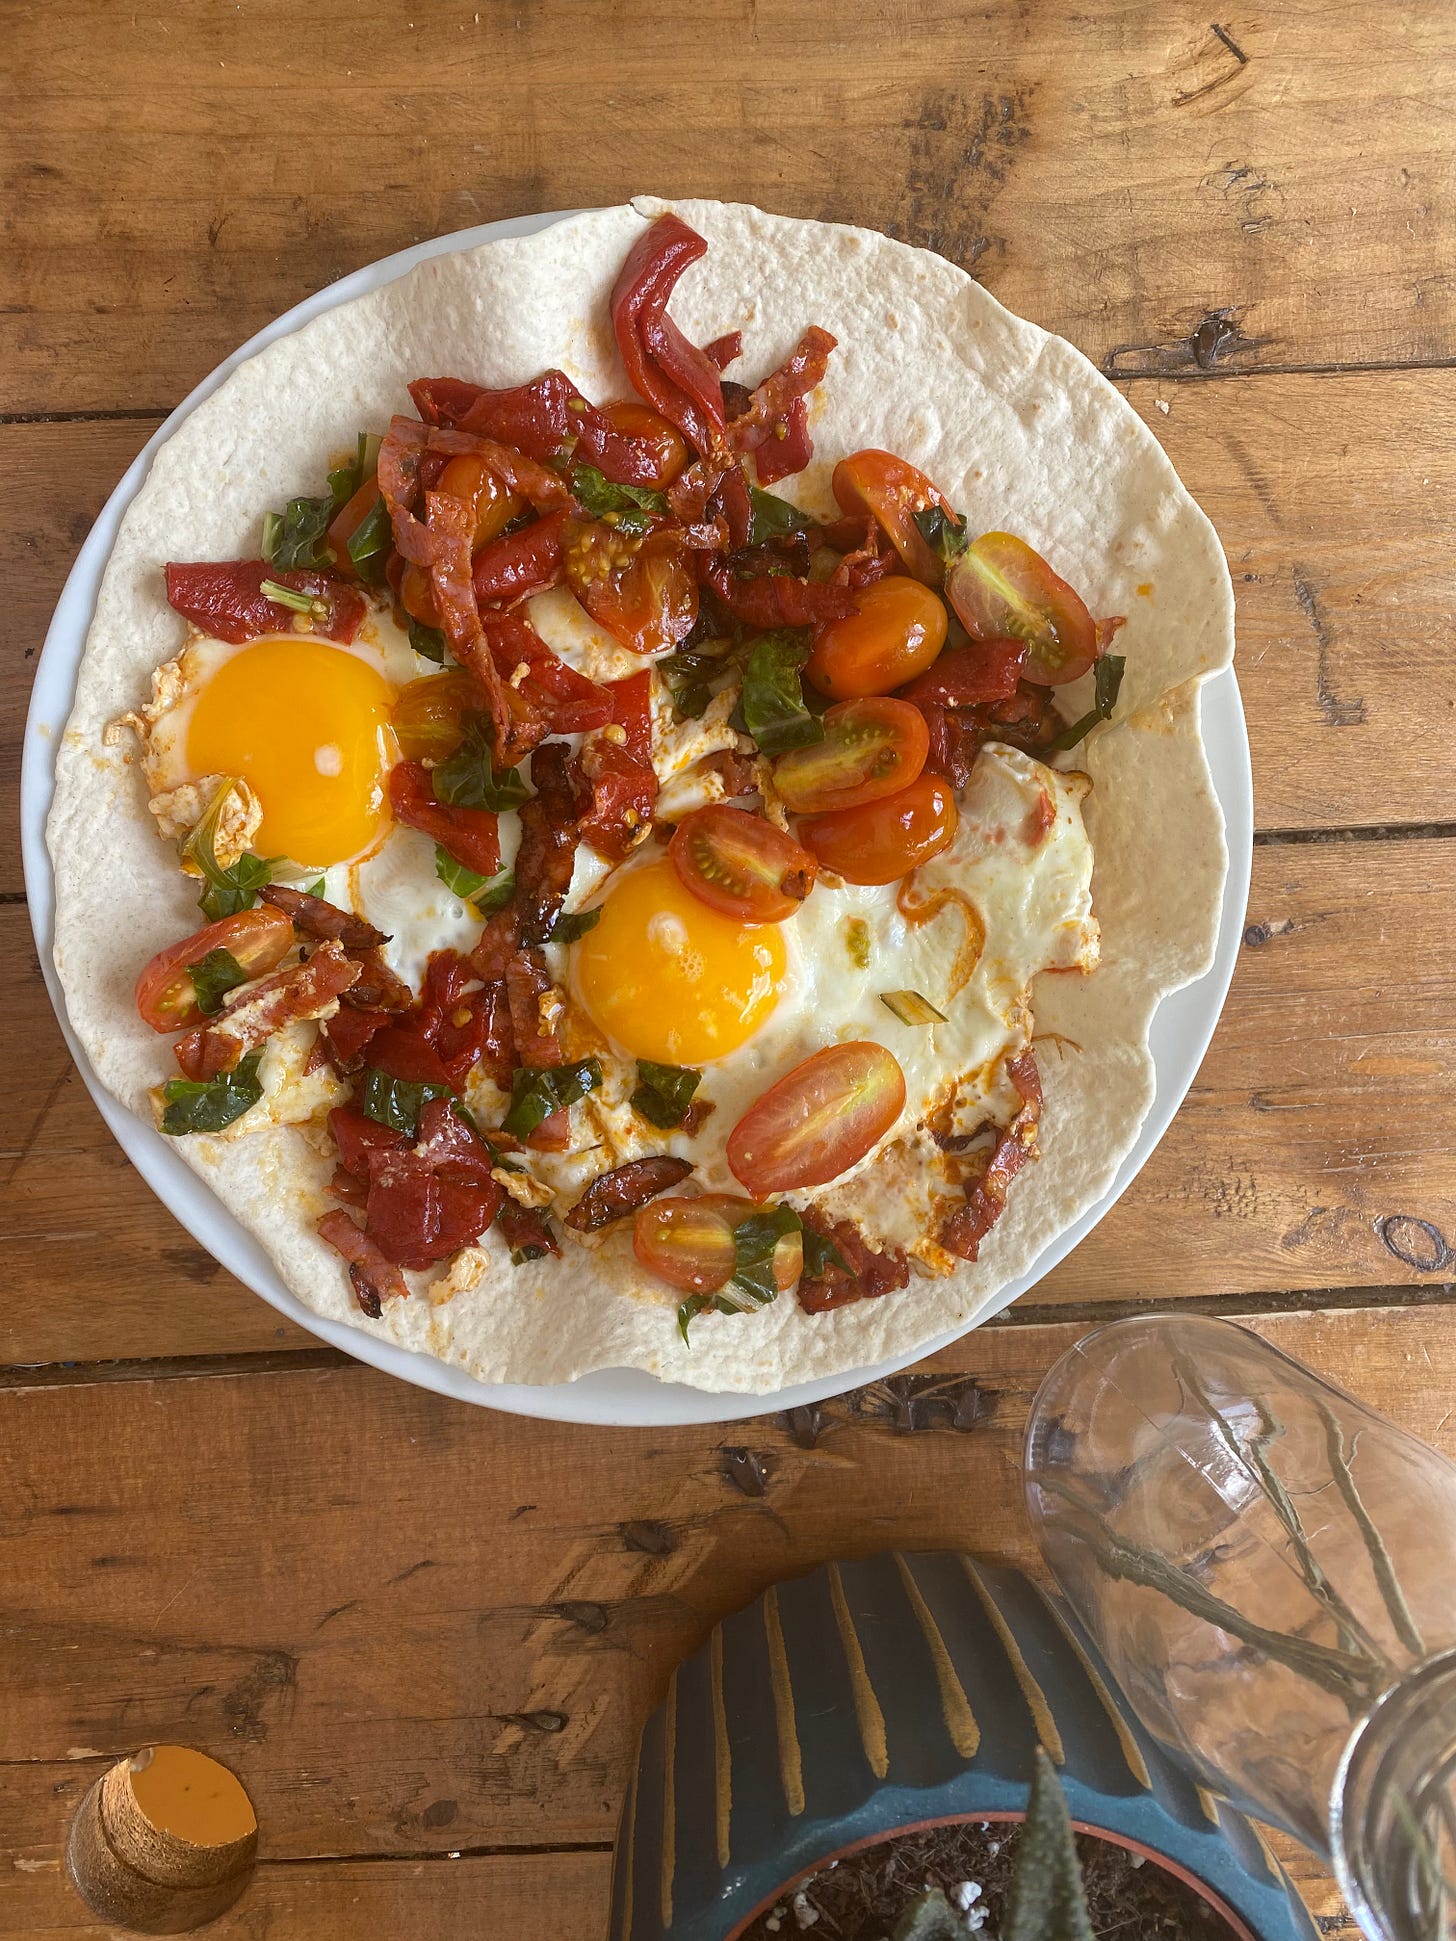 Tortilla wrap topped with two fried eggs, tomatoes, peppers and green leafy vegetable.